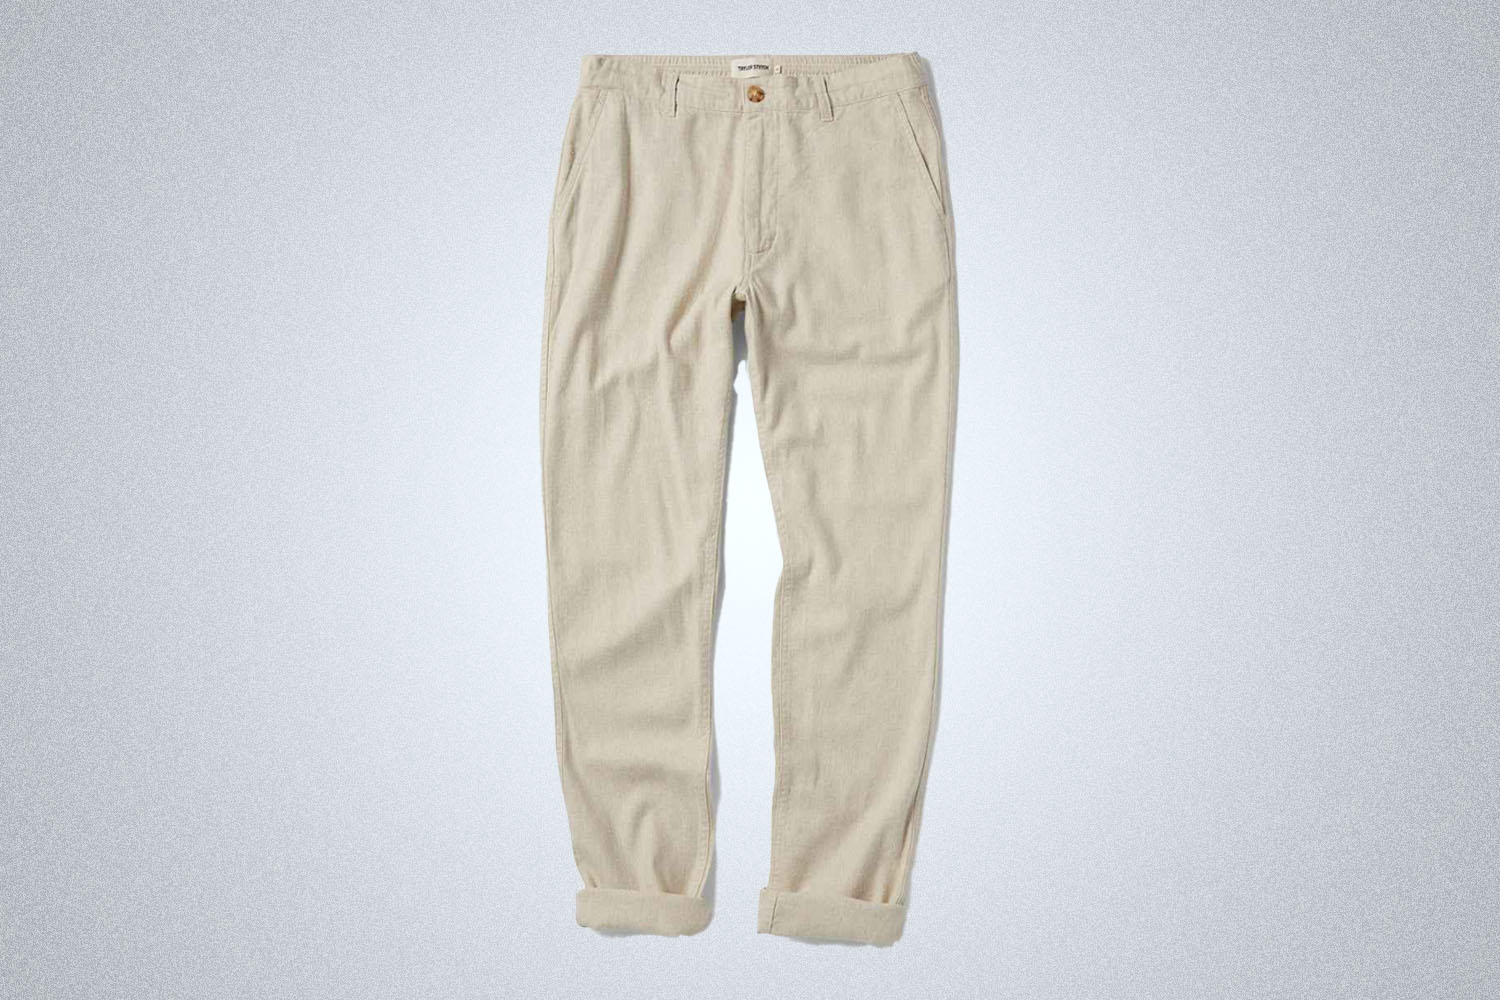 a pair of beige drawstring pants from Taylor Stitch on a grey background